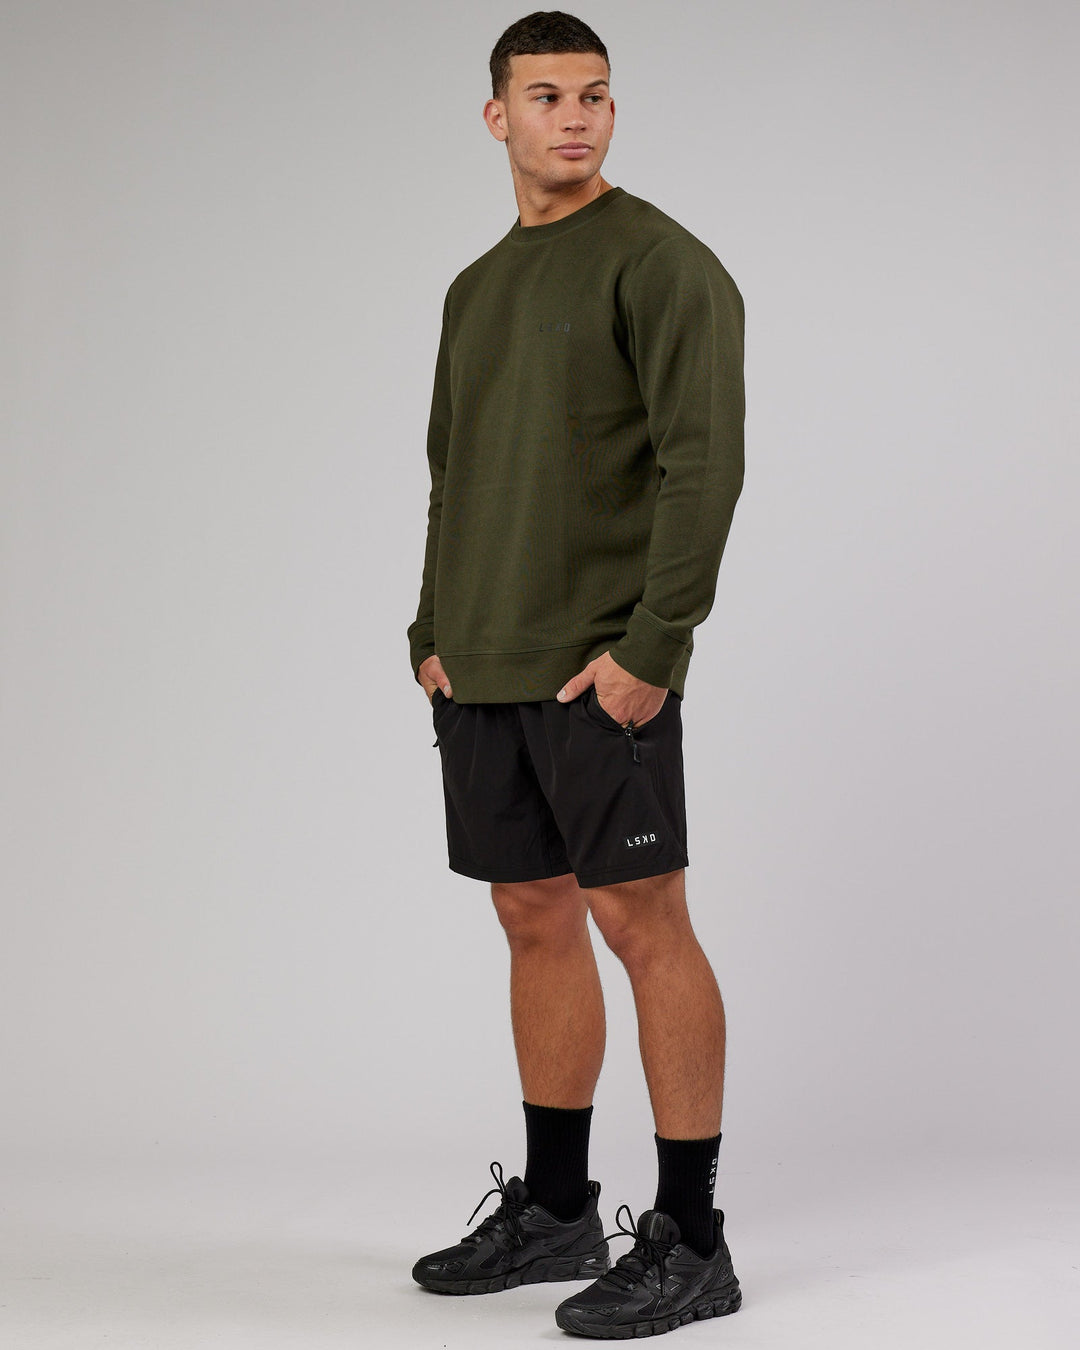 Athlete ForgedFleece Sweater - Forest Night